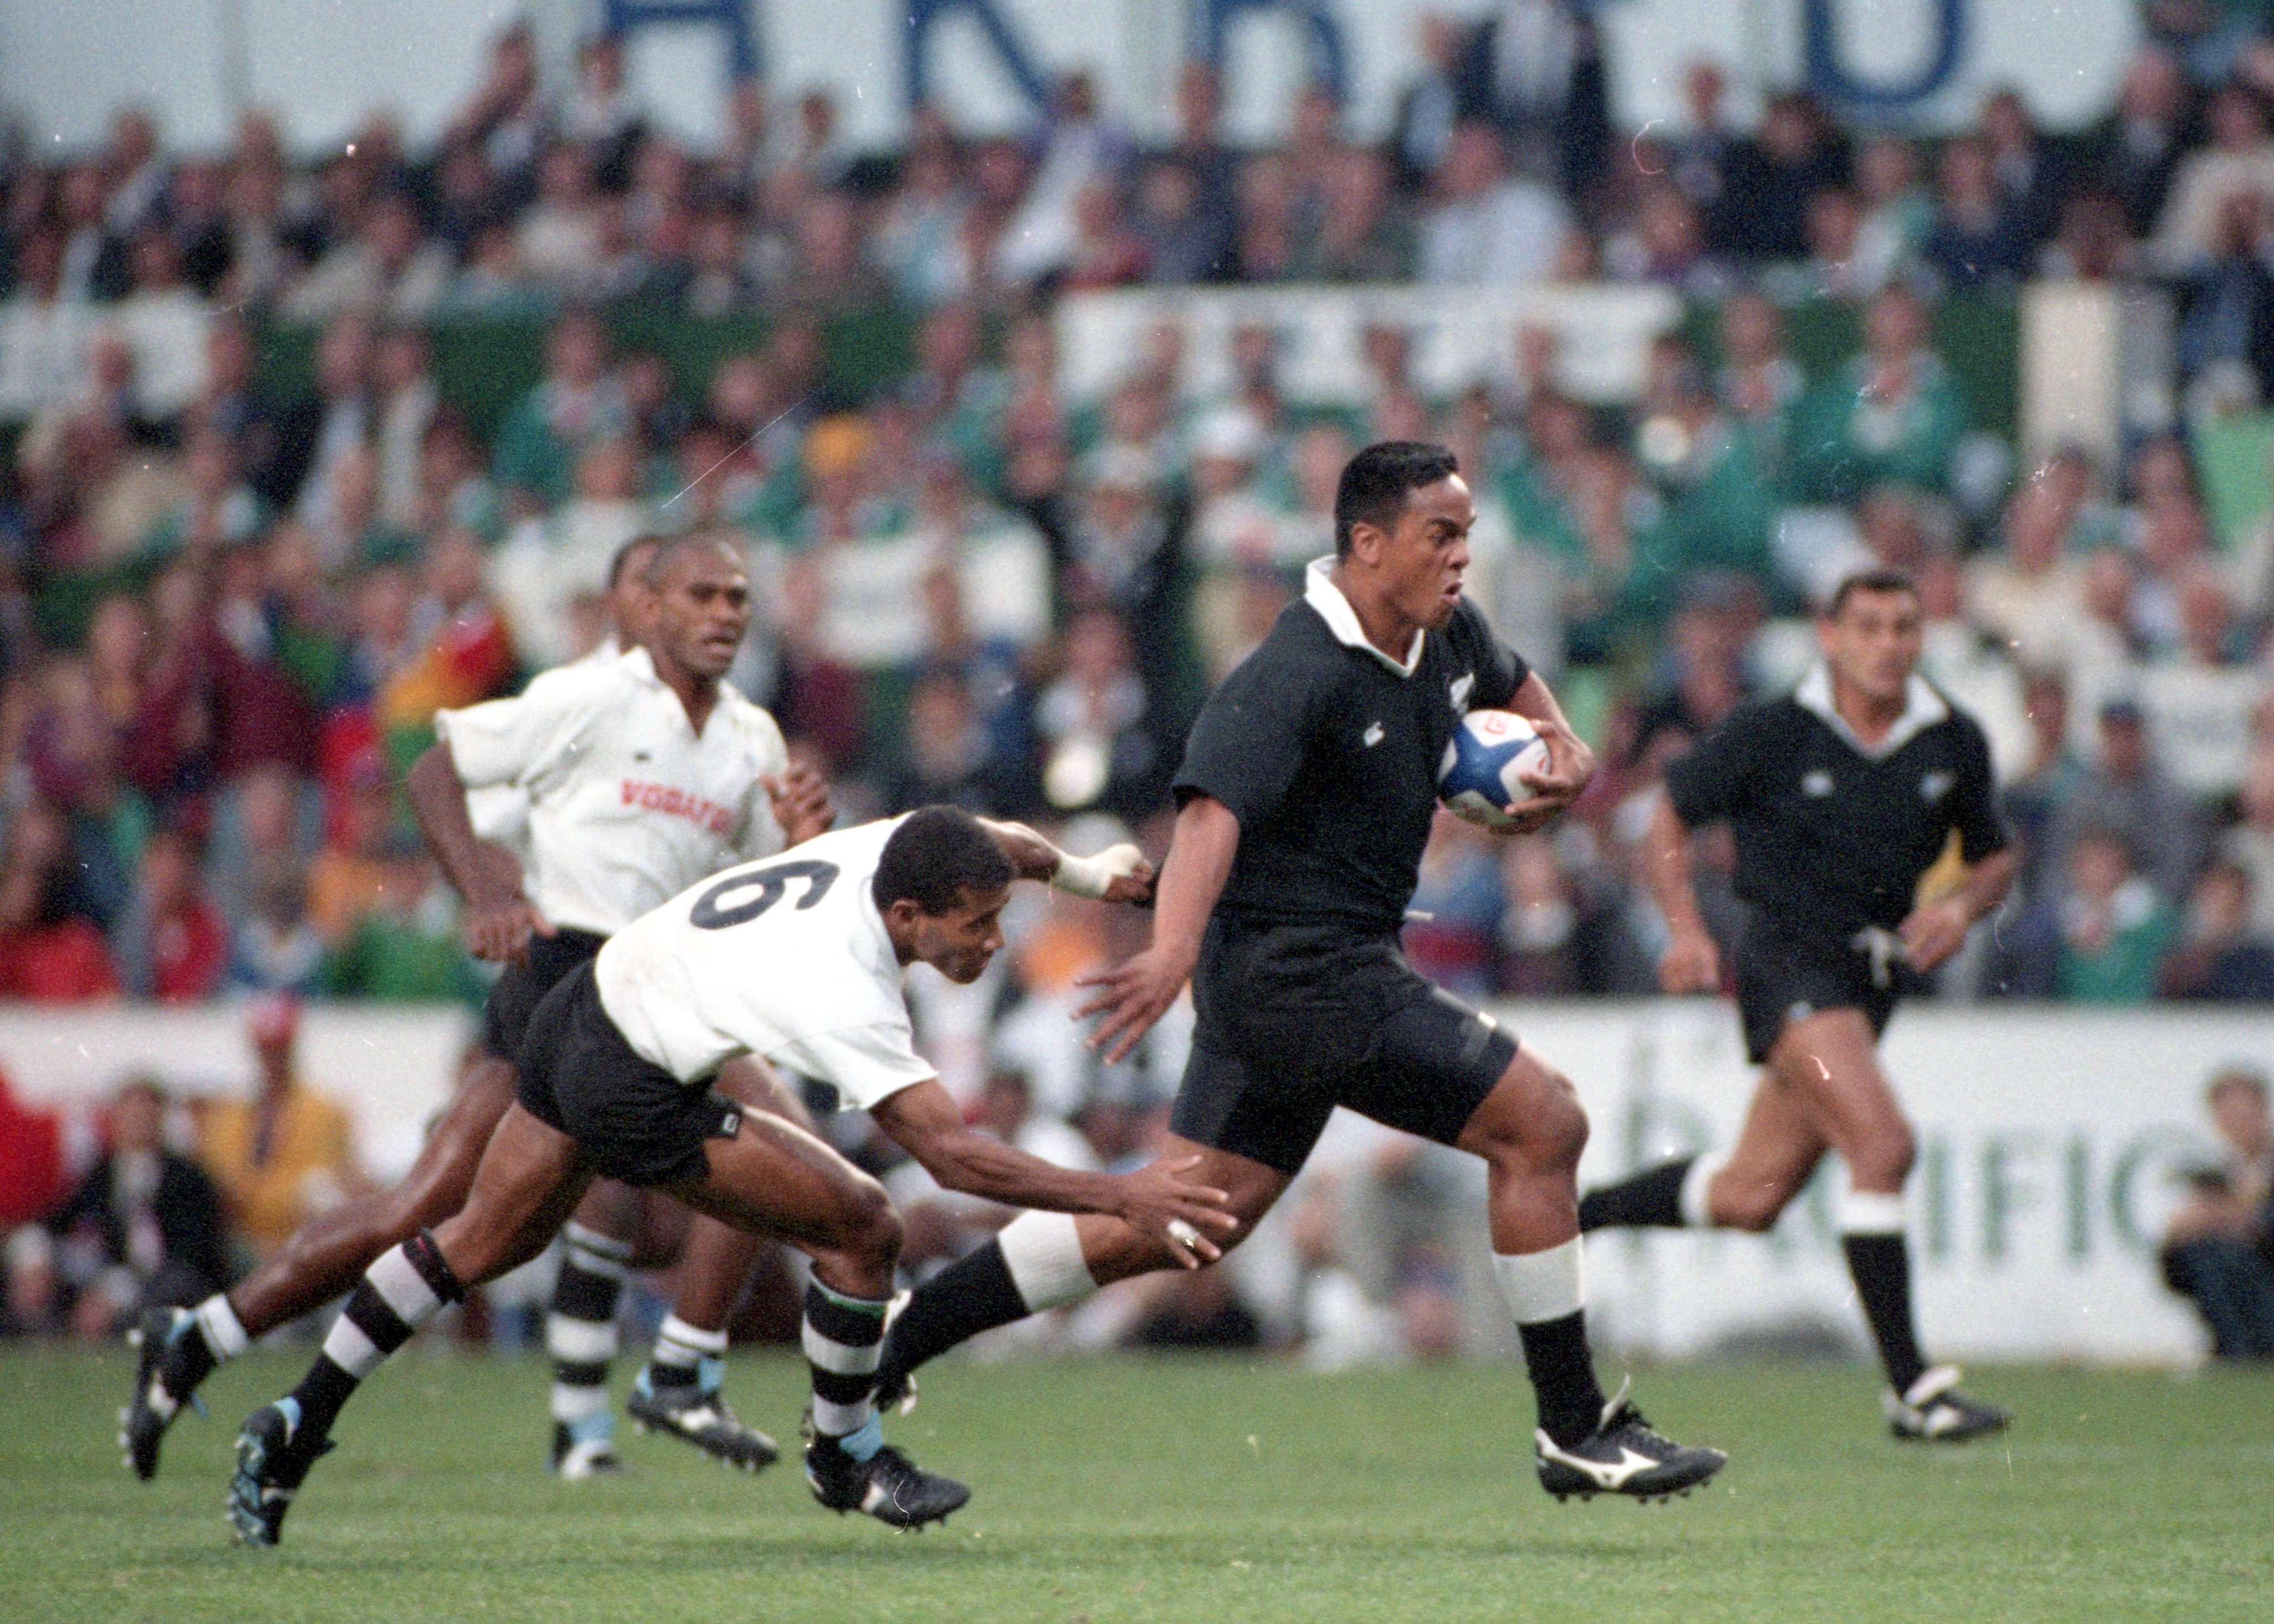 New Zealand’s Jonah Lomu sprints away from Fiji’s Waisale Serevi in the 1995 Cup final in Hong Kong. Photo: SCMP